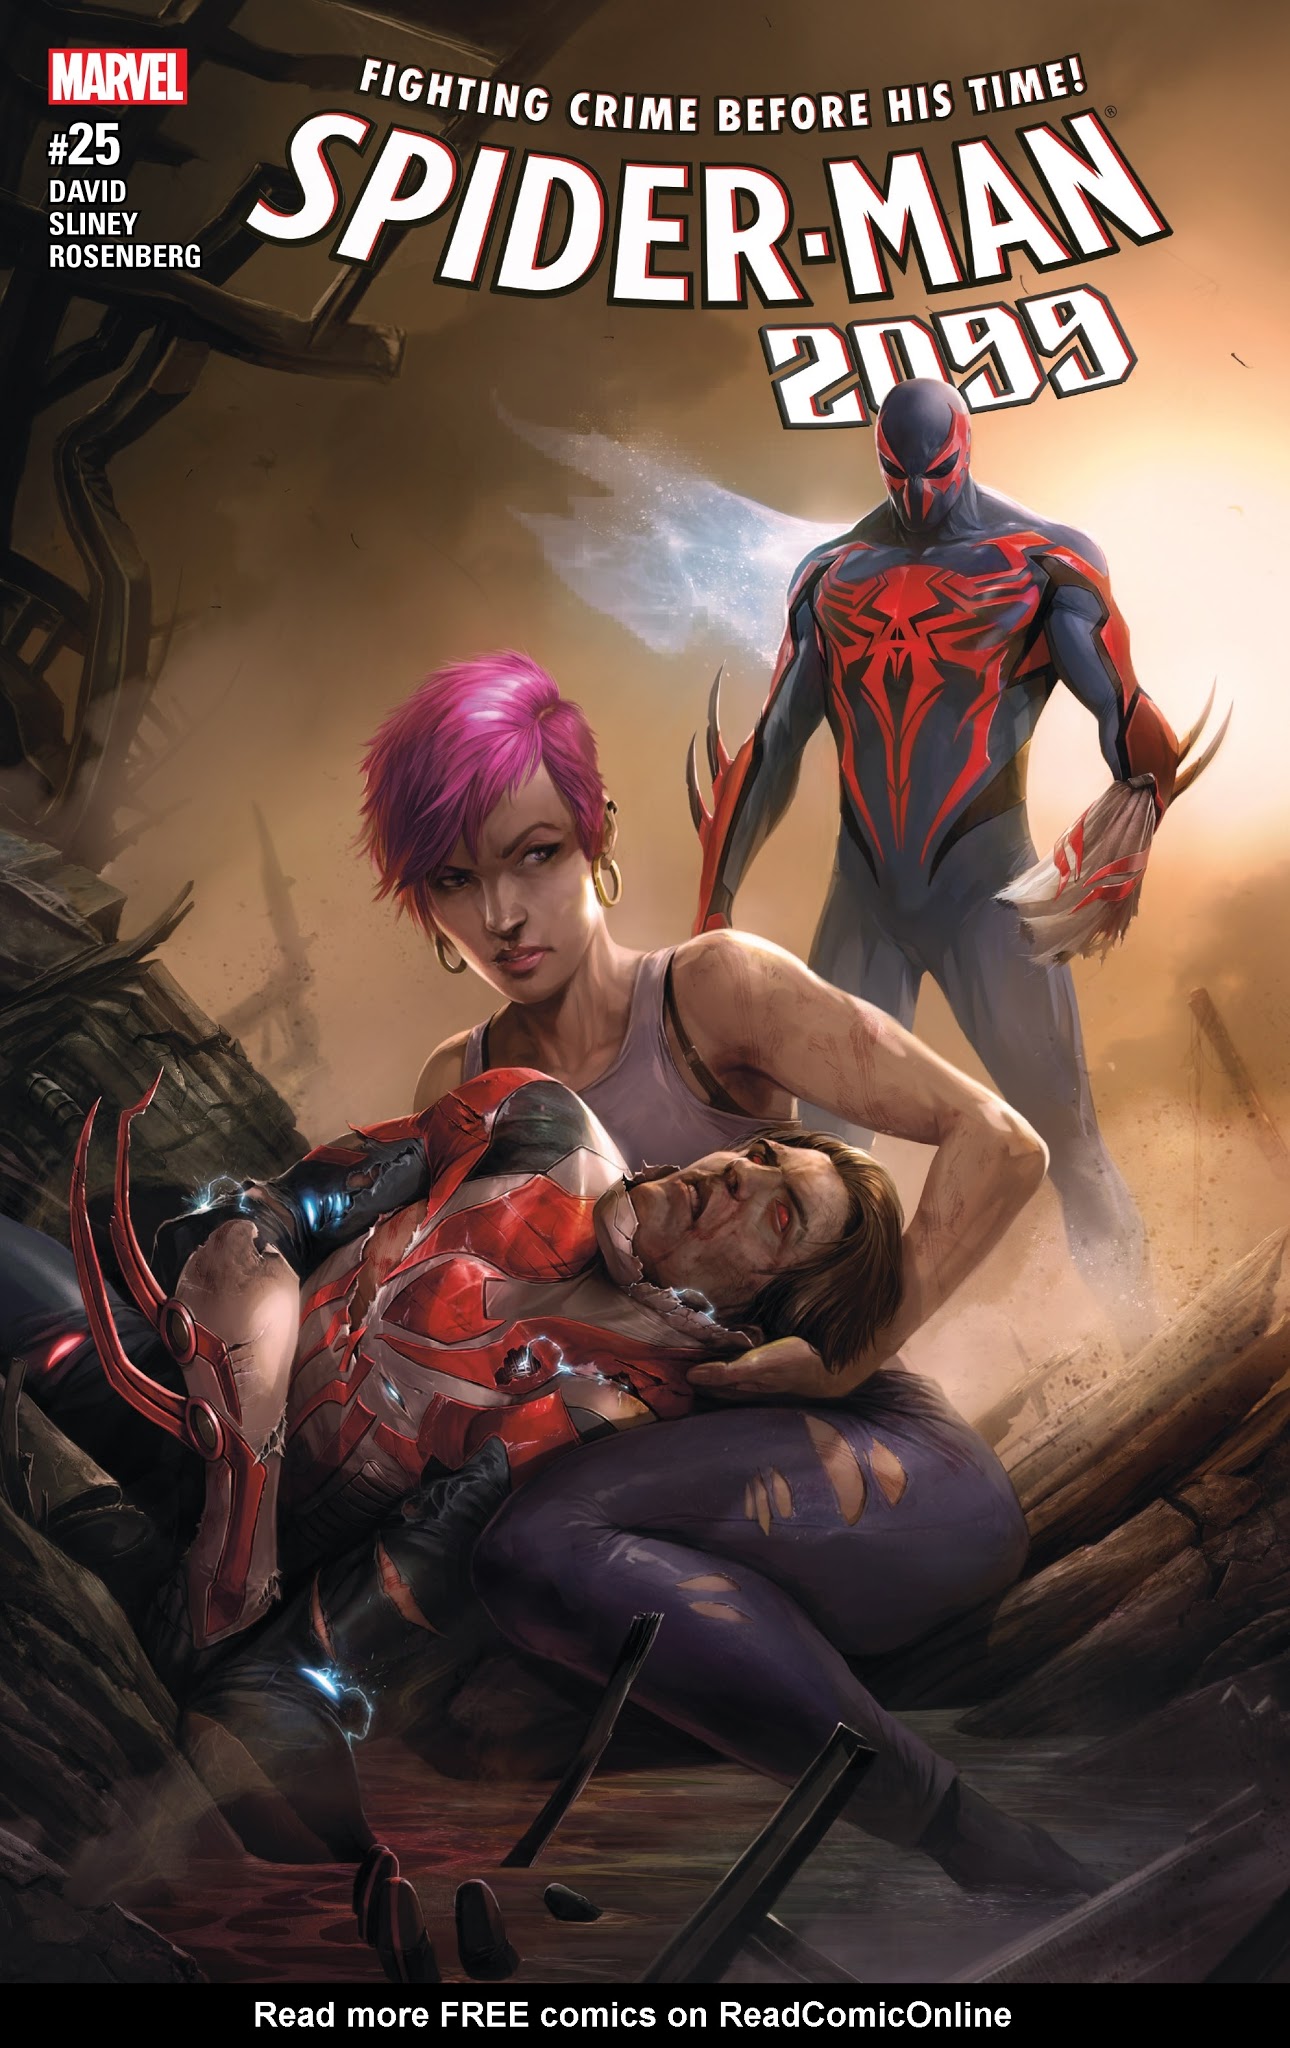 Xxx Bf 2099 - Spider Man 2099 2015 Issue 25 | Read Spider Man 2099 2015 Issue 25 comic  online in high quality. Read Full Comic online for free - Read comics  online in high quality .|viewcomiconline.com